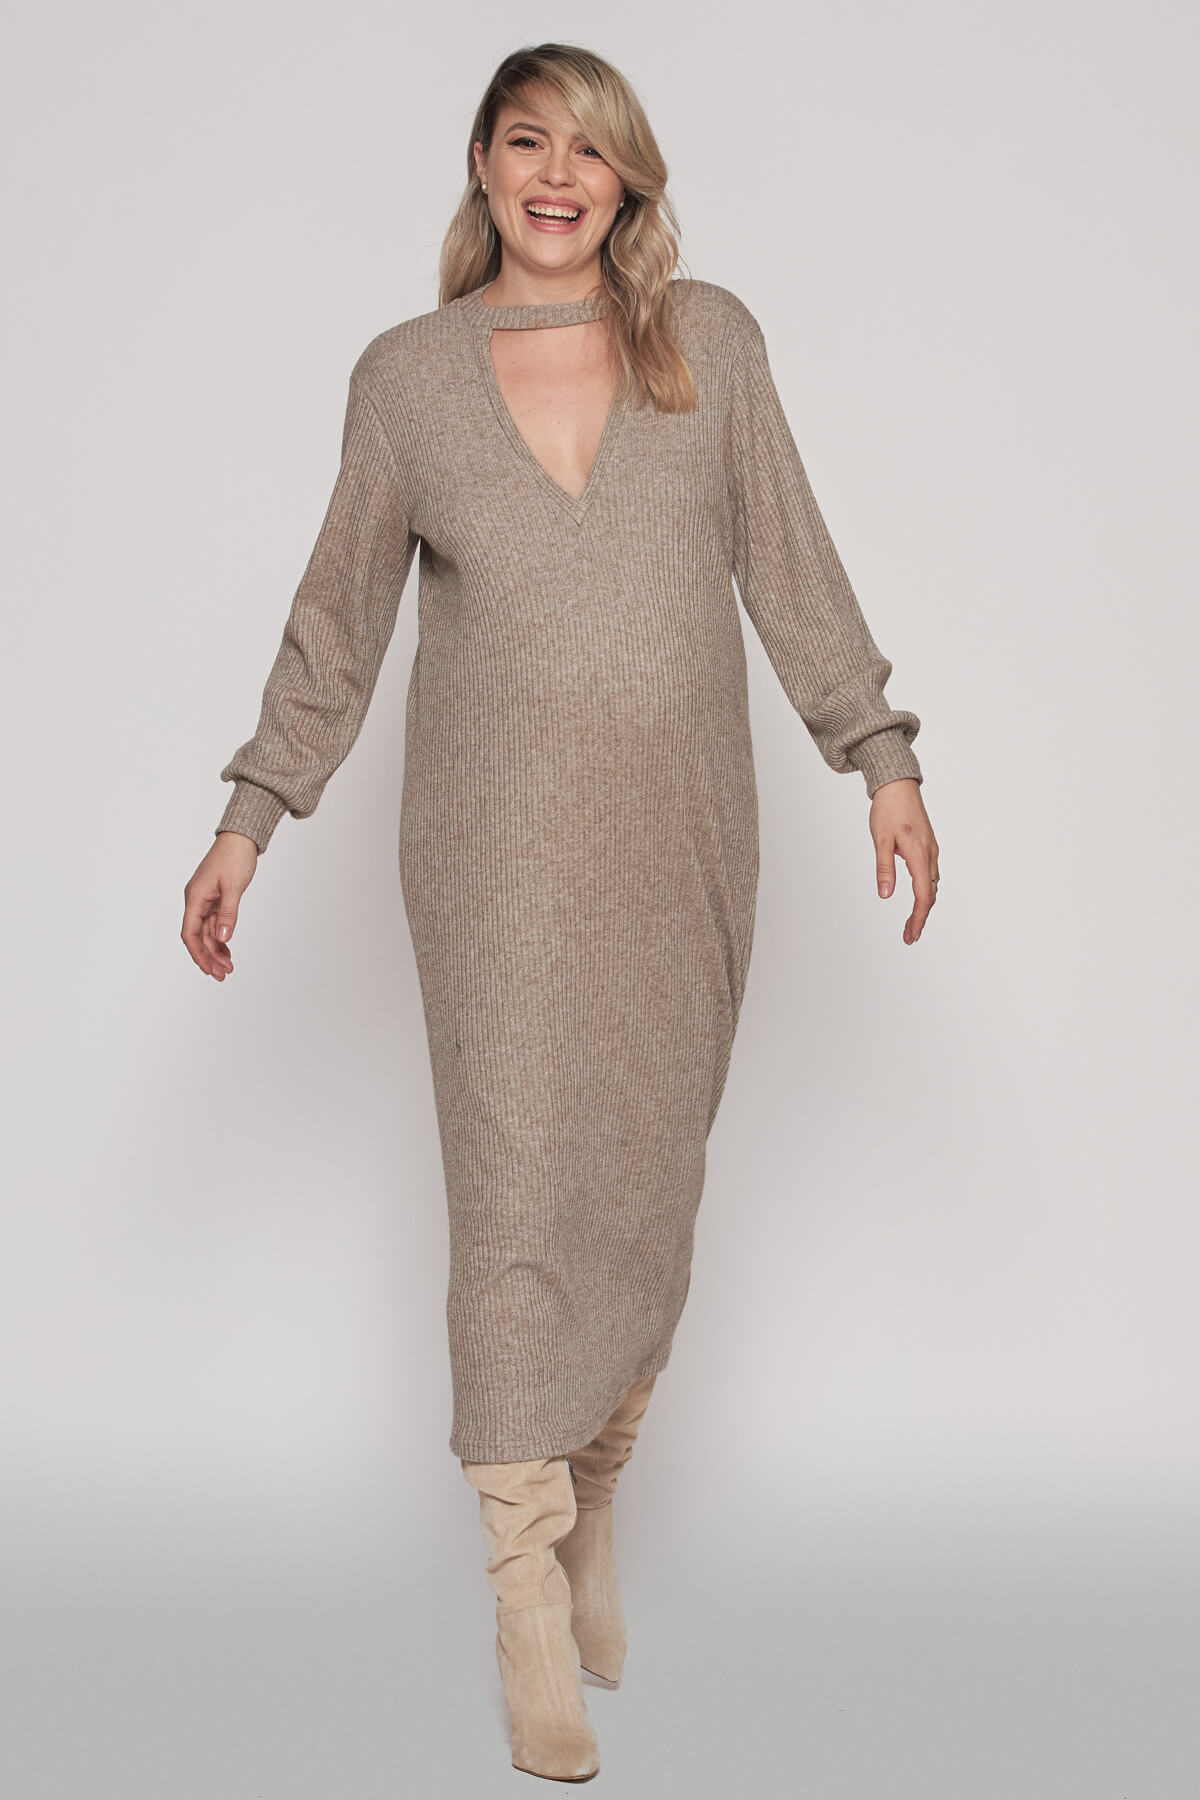 Loose fitted ribbed knitwear dress with a “V”-neck detail perfect for everyday use or pregnancy stage.